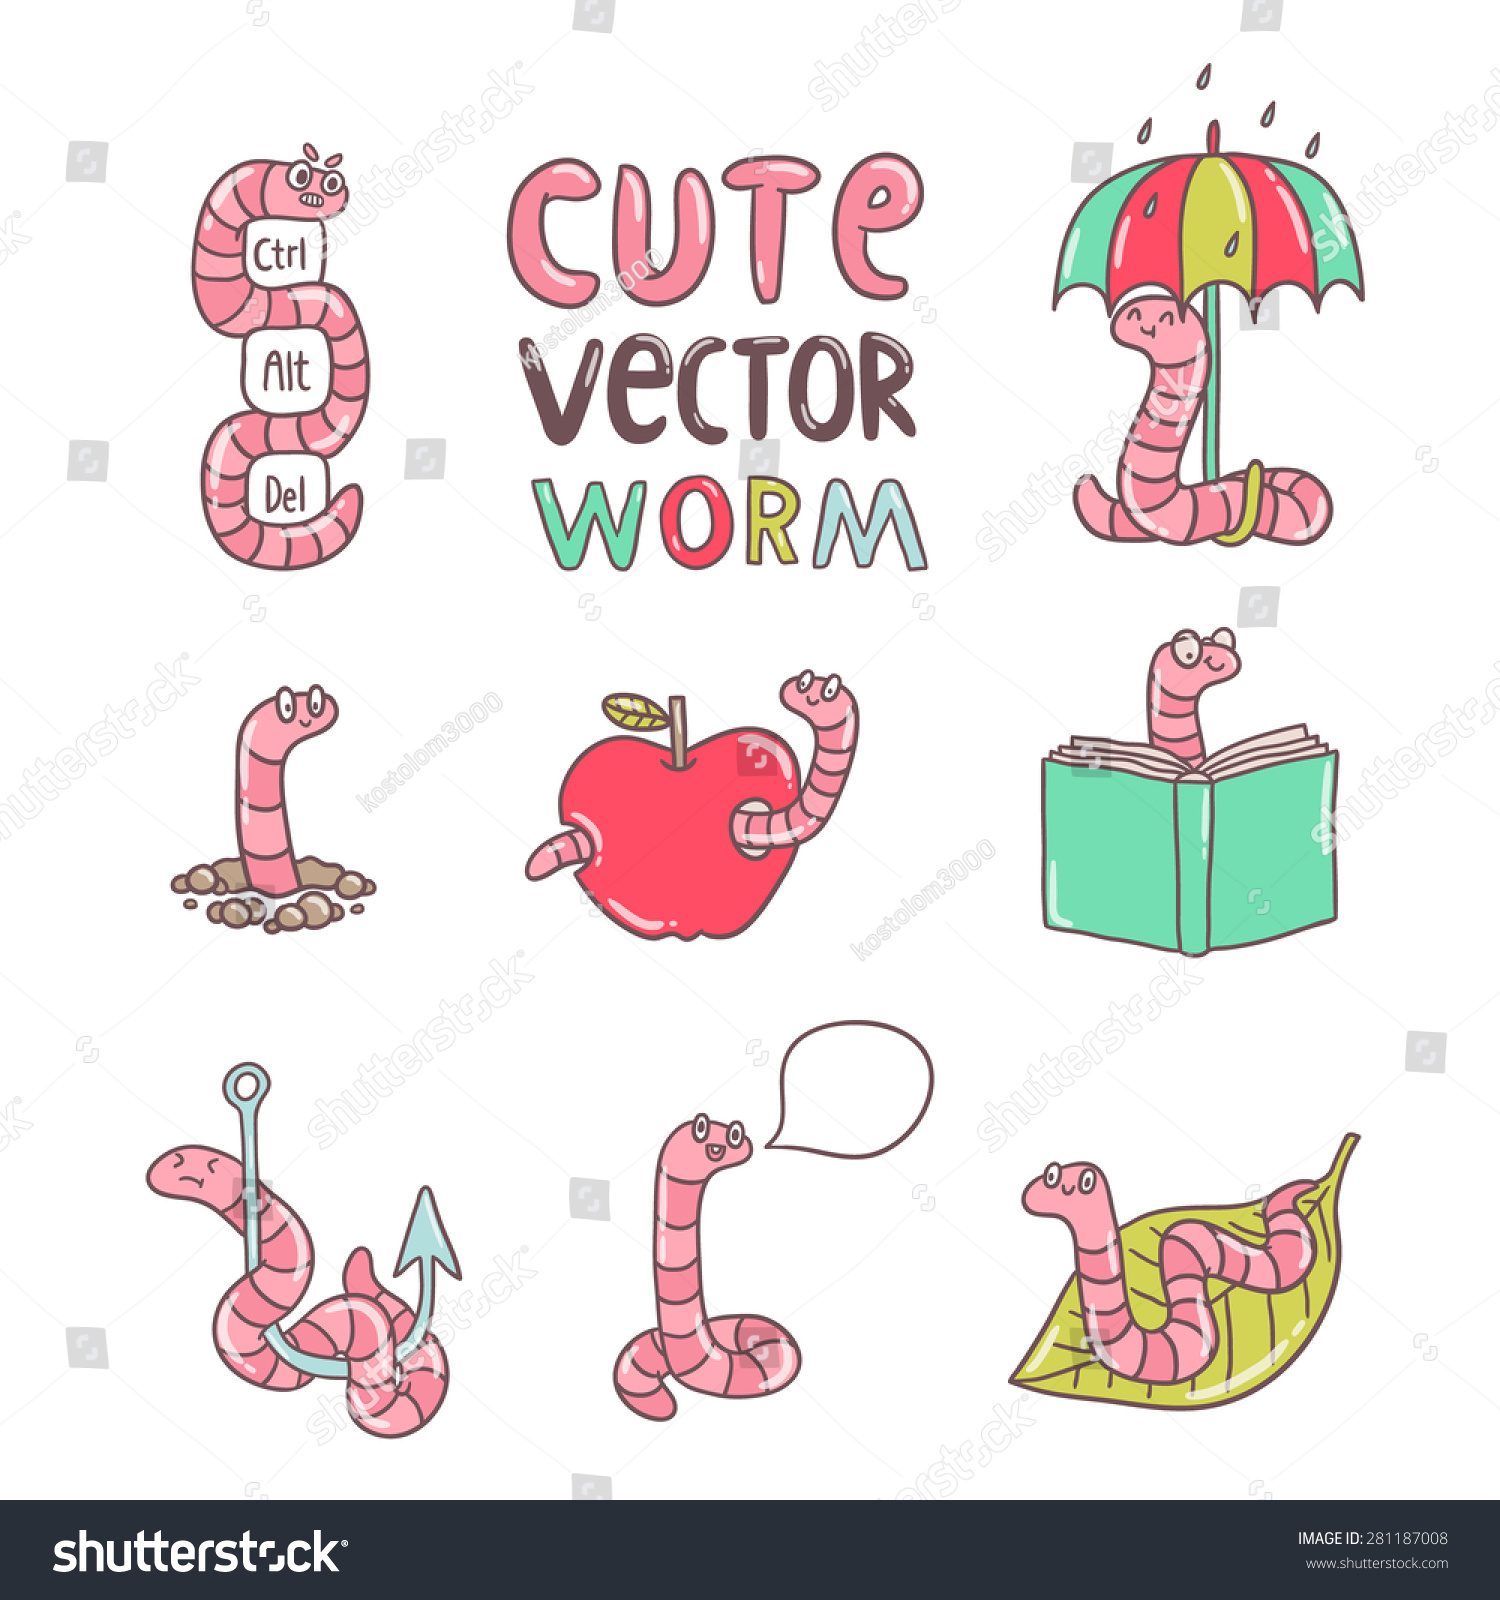 Download Cute Funny Hand Drawn Vector Worm Stock Vector 281187008 ...